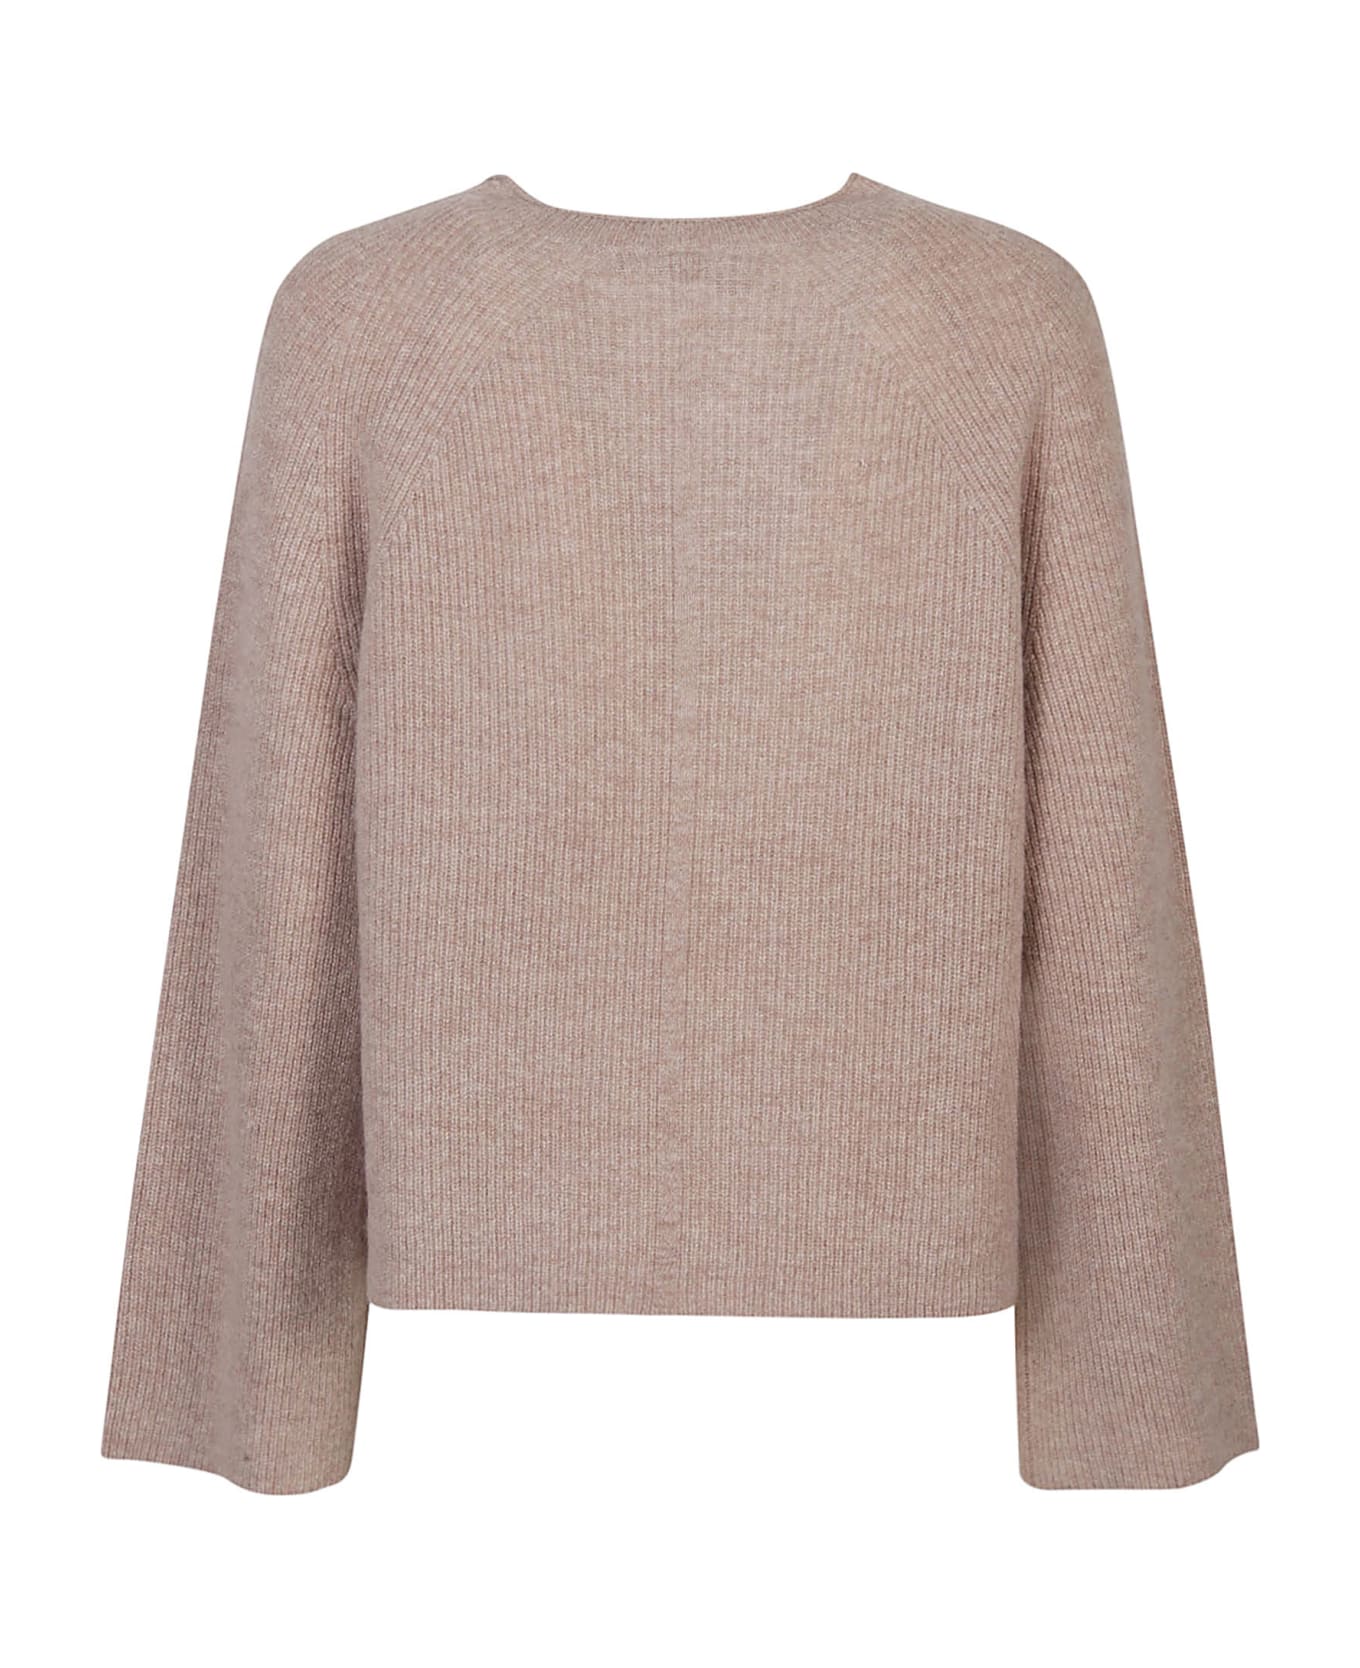 360Cashmere Sophie Trapeze Round Neck Sweater - Toast